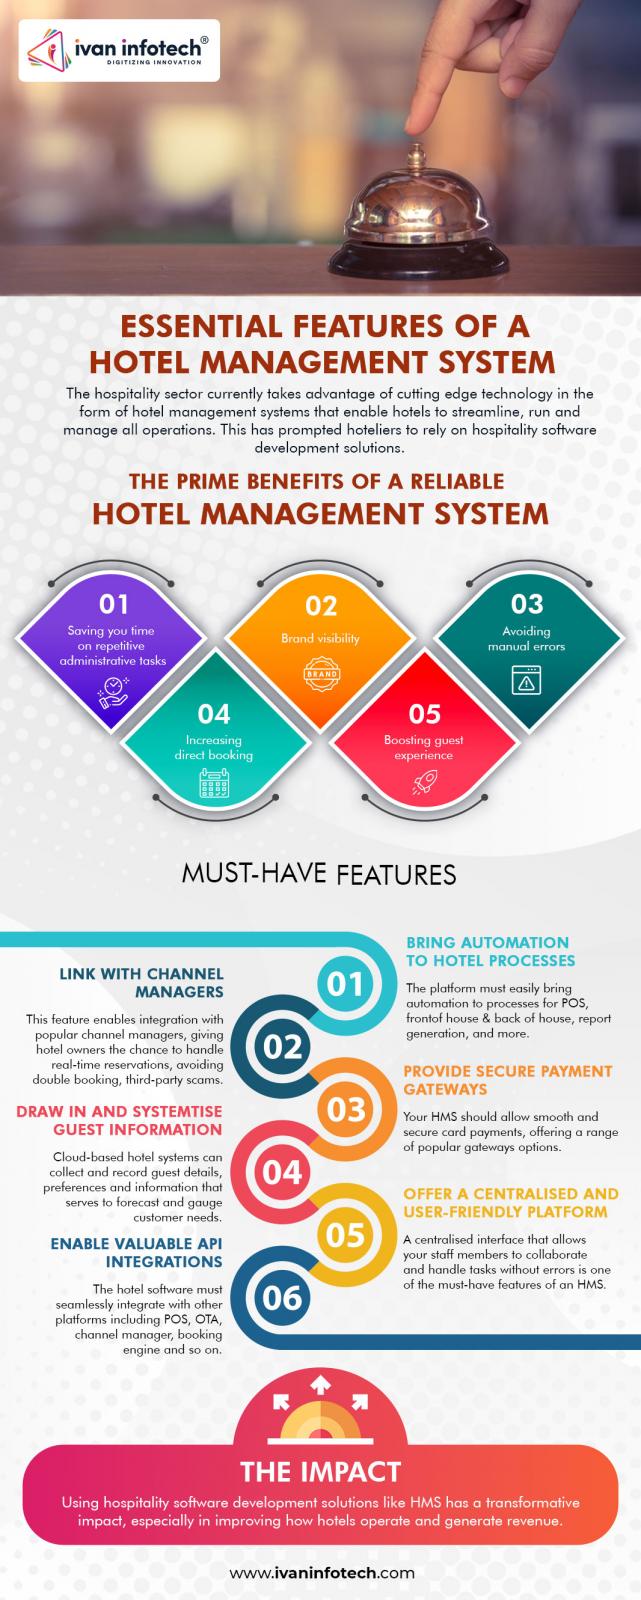 ESSENTIAL FEATURES OF A HOTEL MANAGEMENT SYSTEM